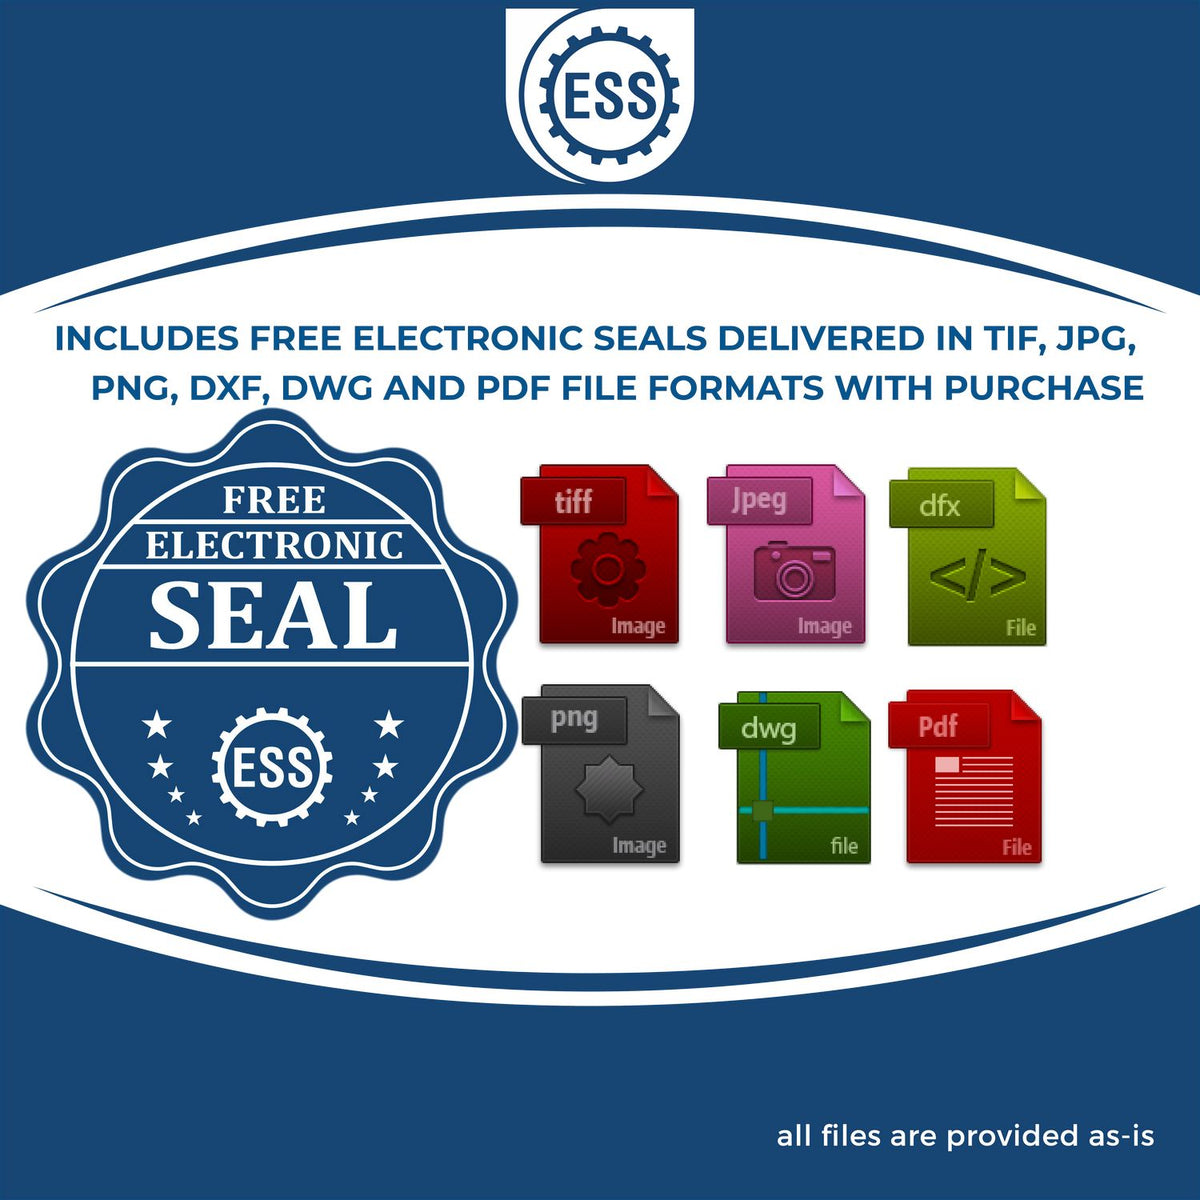 An infographic for the free electronic seal for the Hybrid Utah Land Surveyor Seal illustrating the different file type icons such as DXF, DWG, TIF, JPG and PNG.